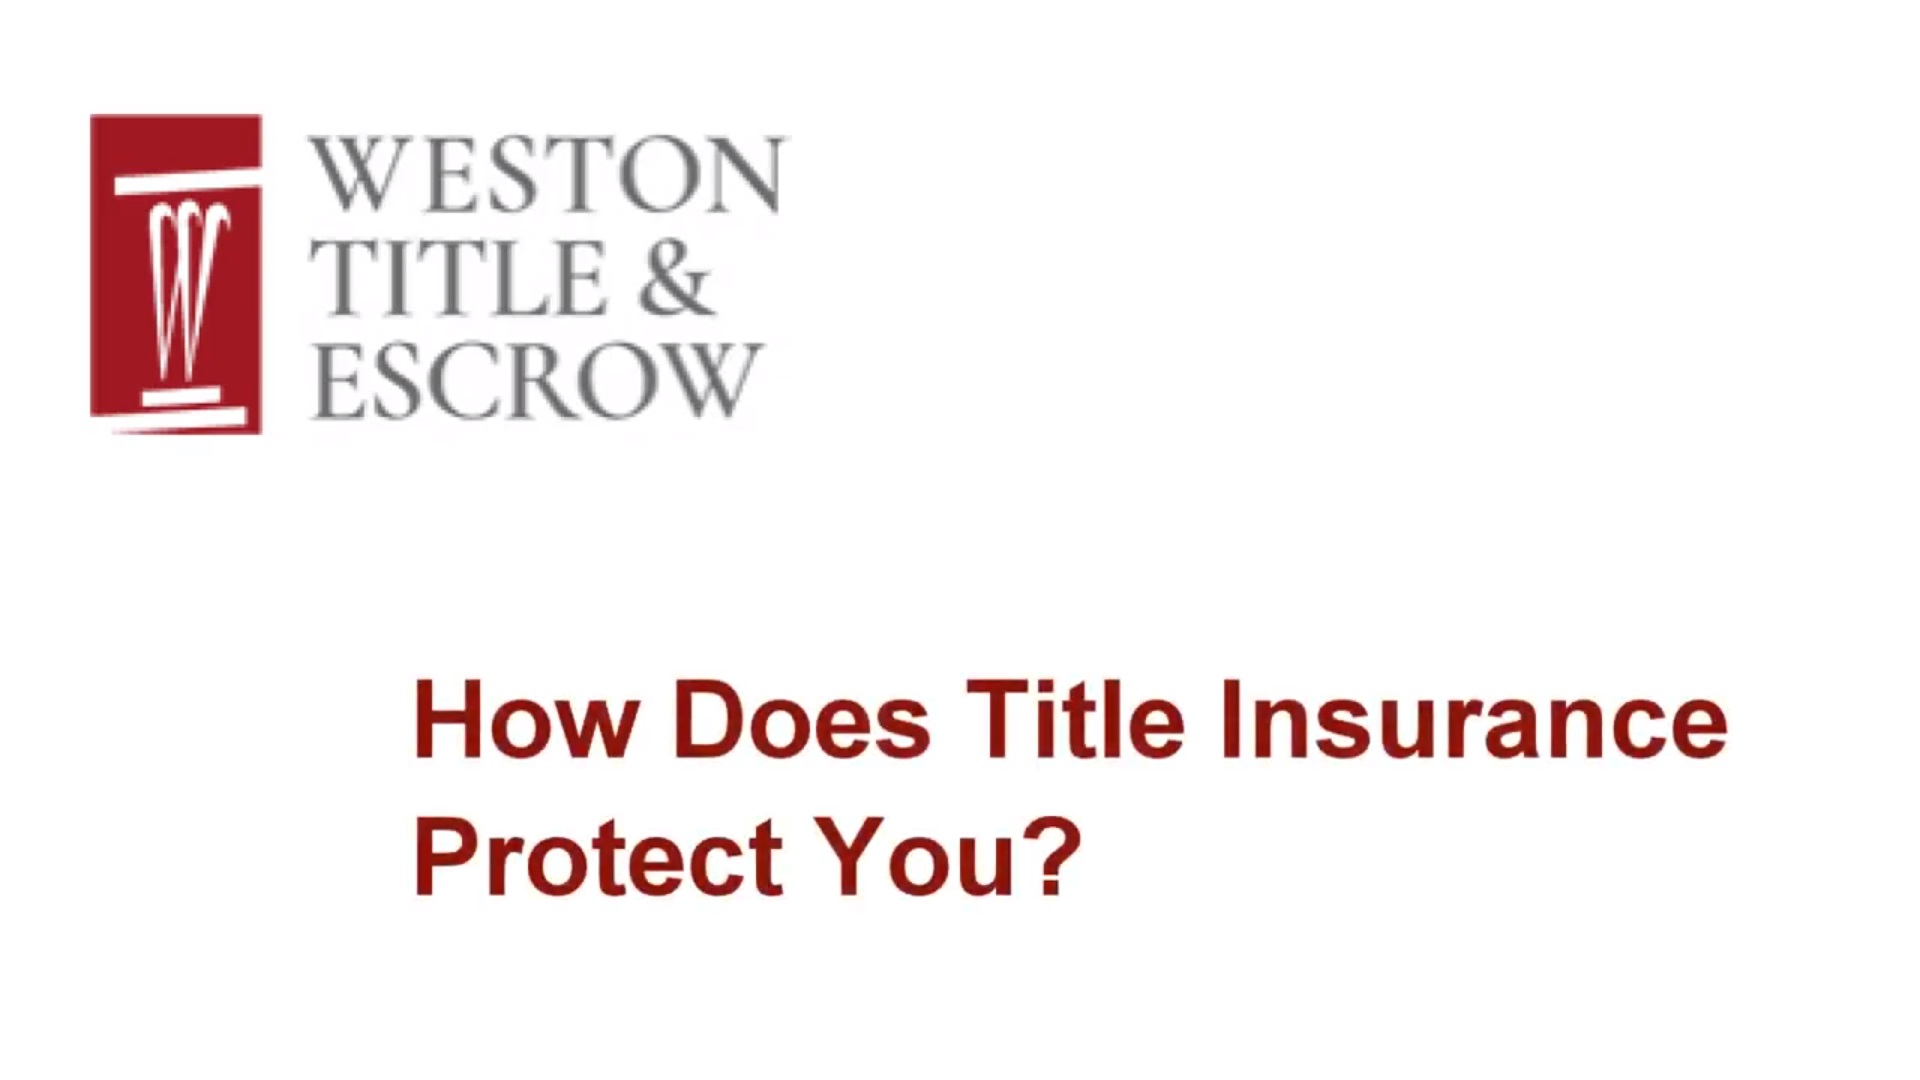 How does title insurance protect you?